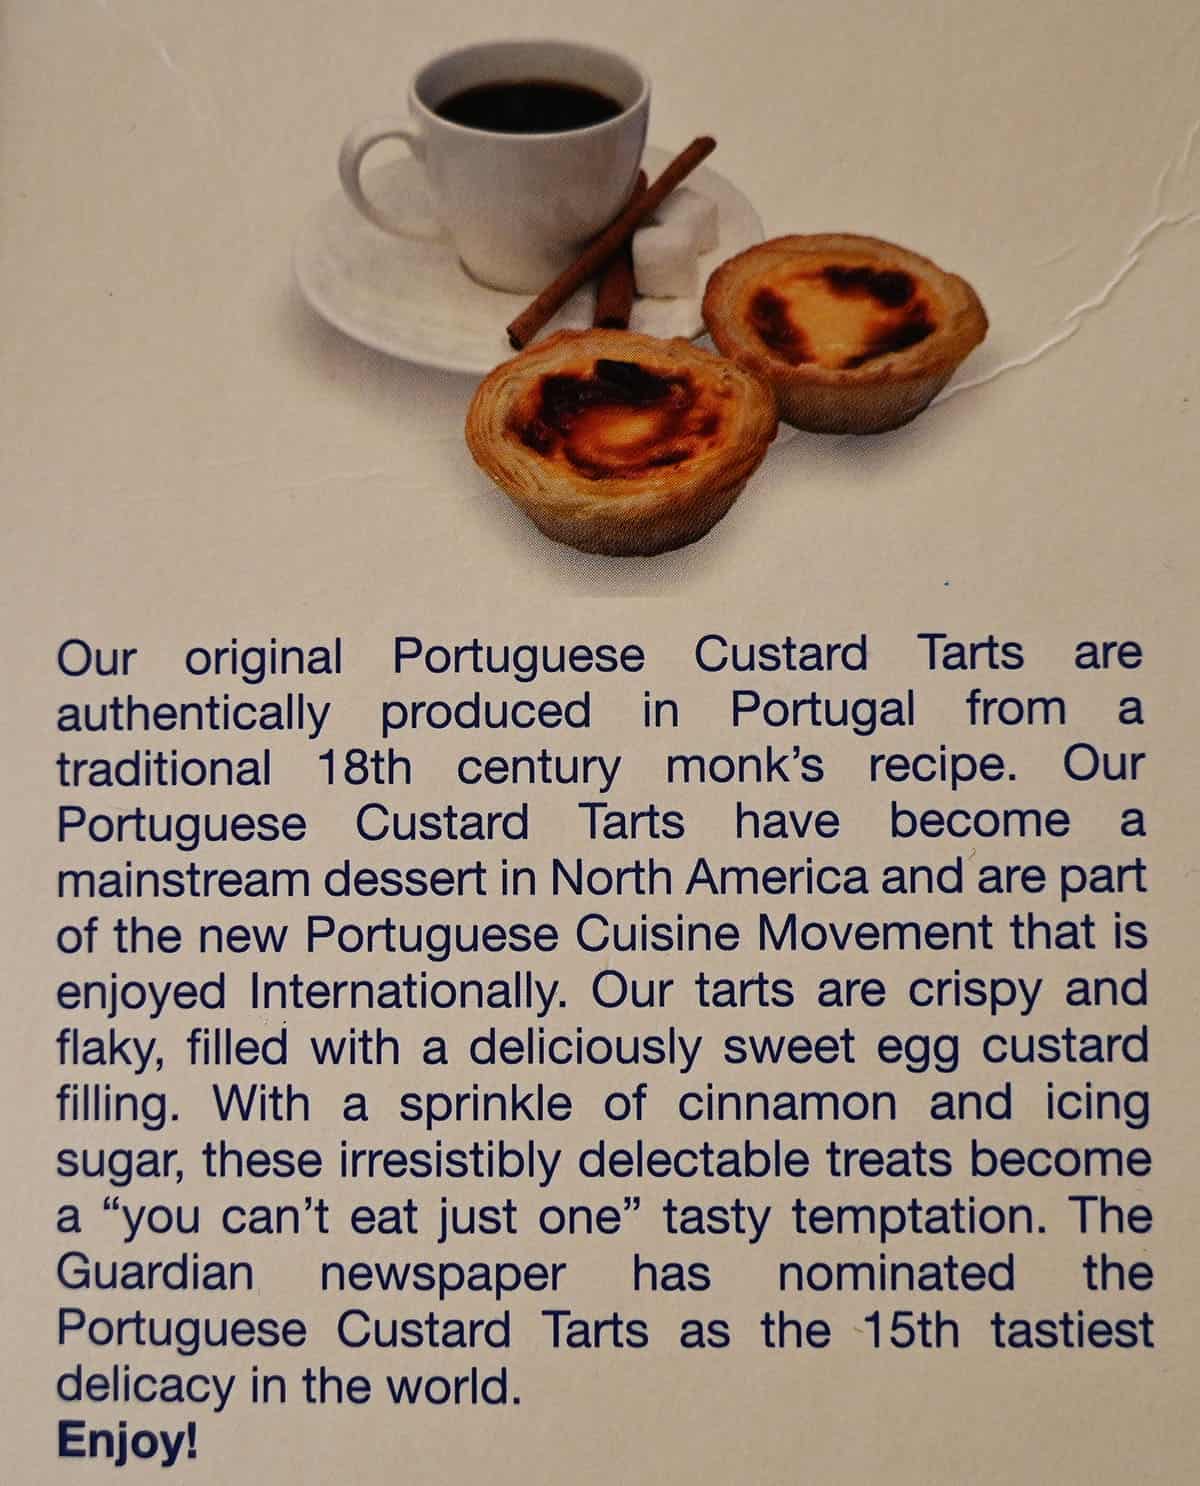 Image of the product description for the tarts from the back of the box.